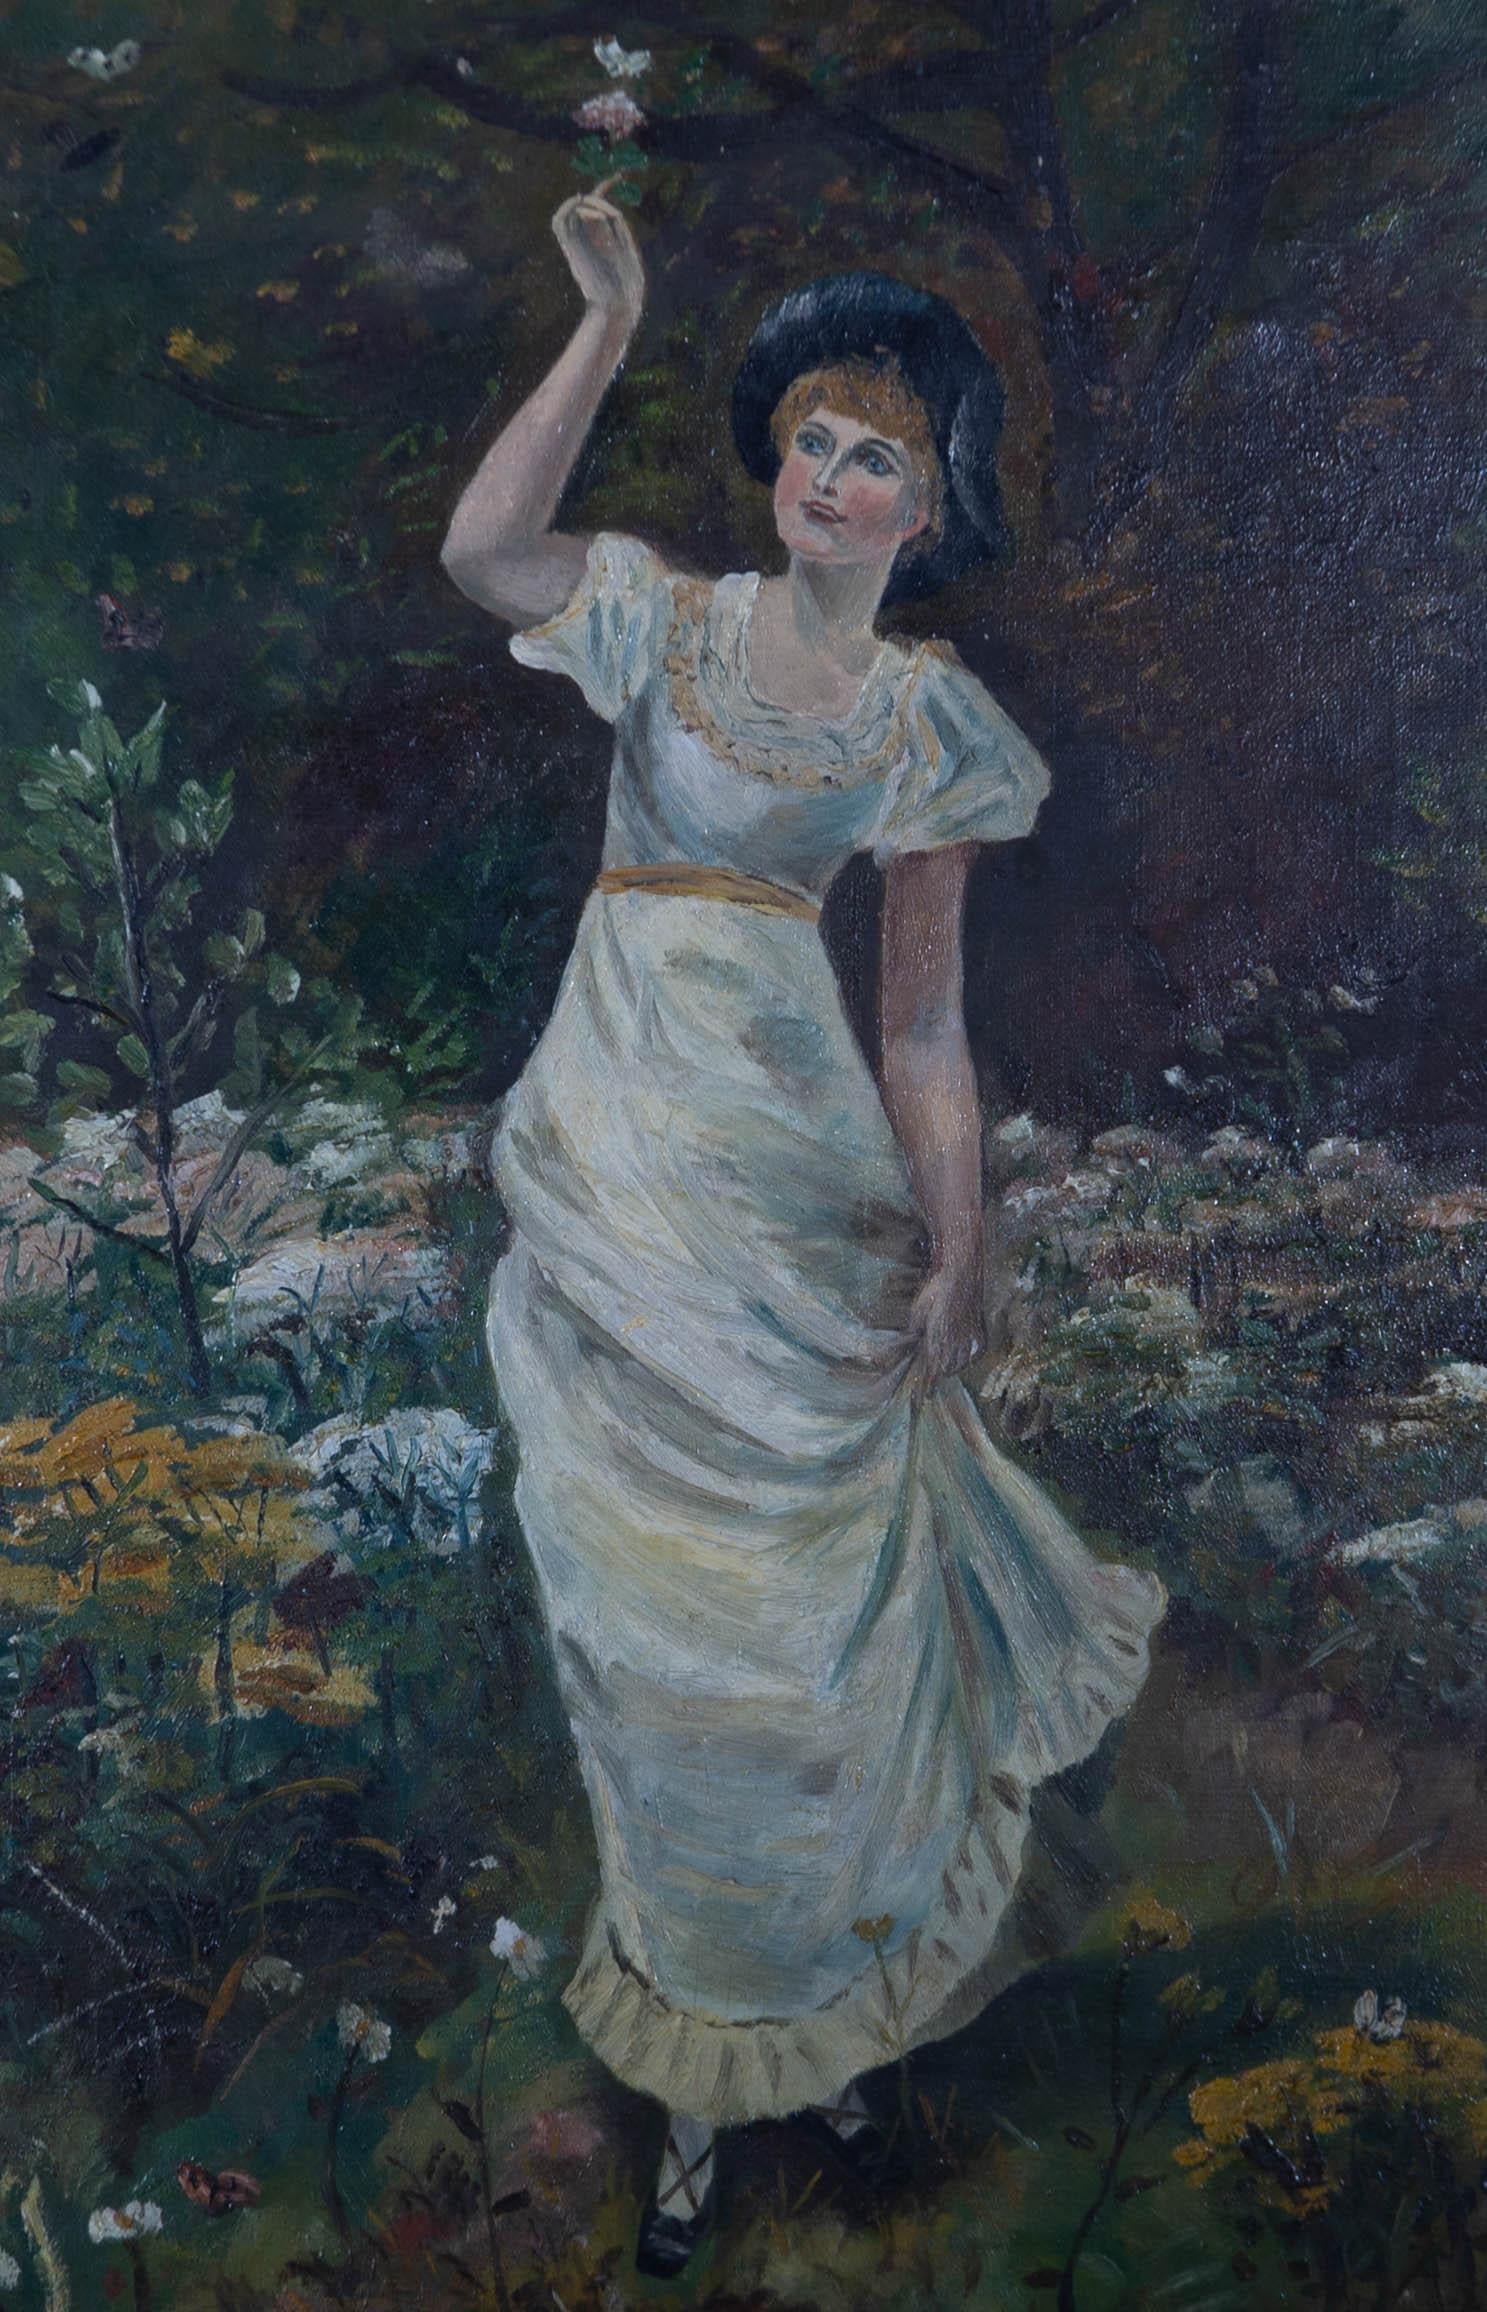 Unknown Portrait Painting - Early 20th Century Oil - Woman in a Garden